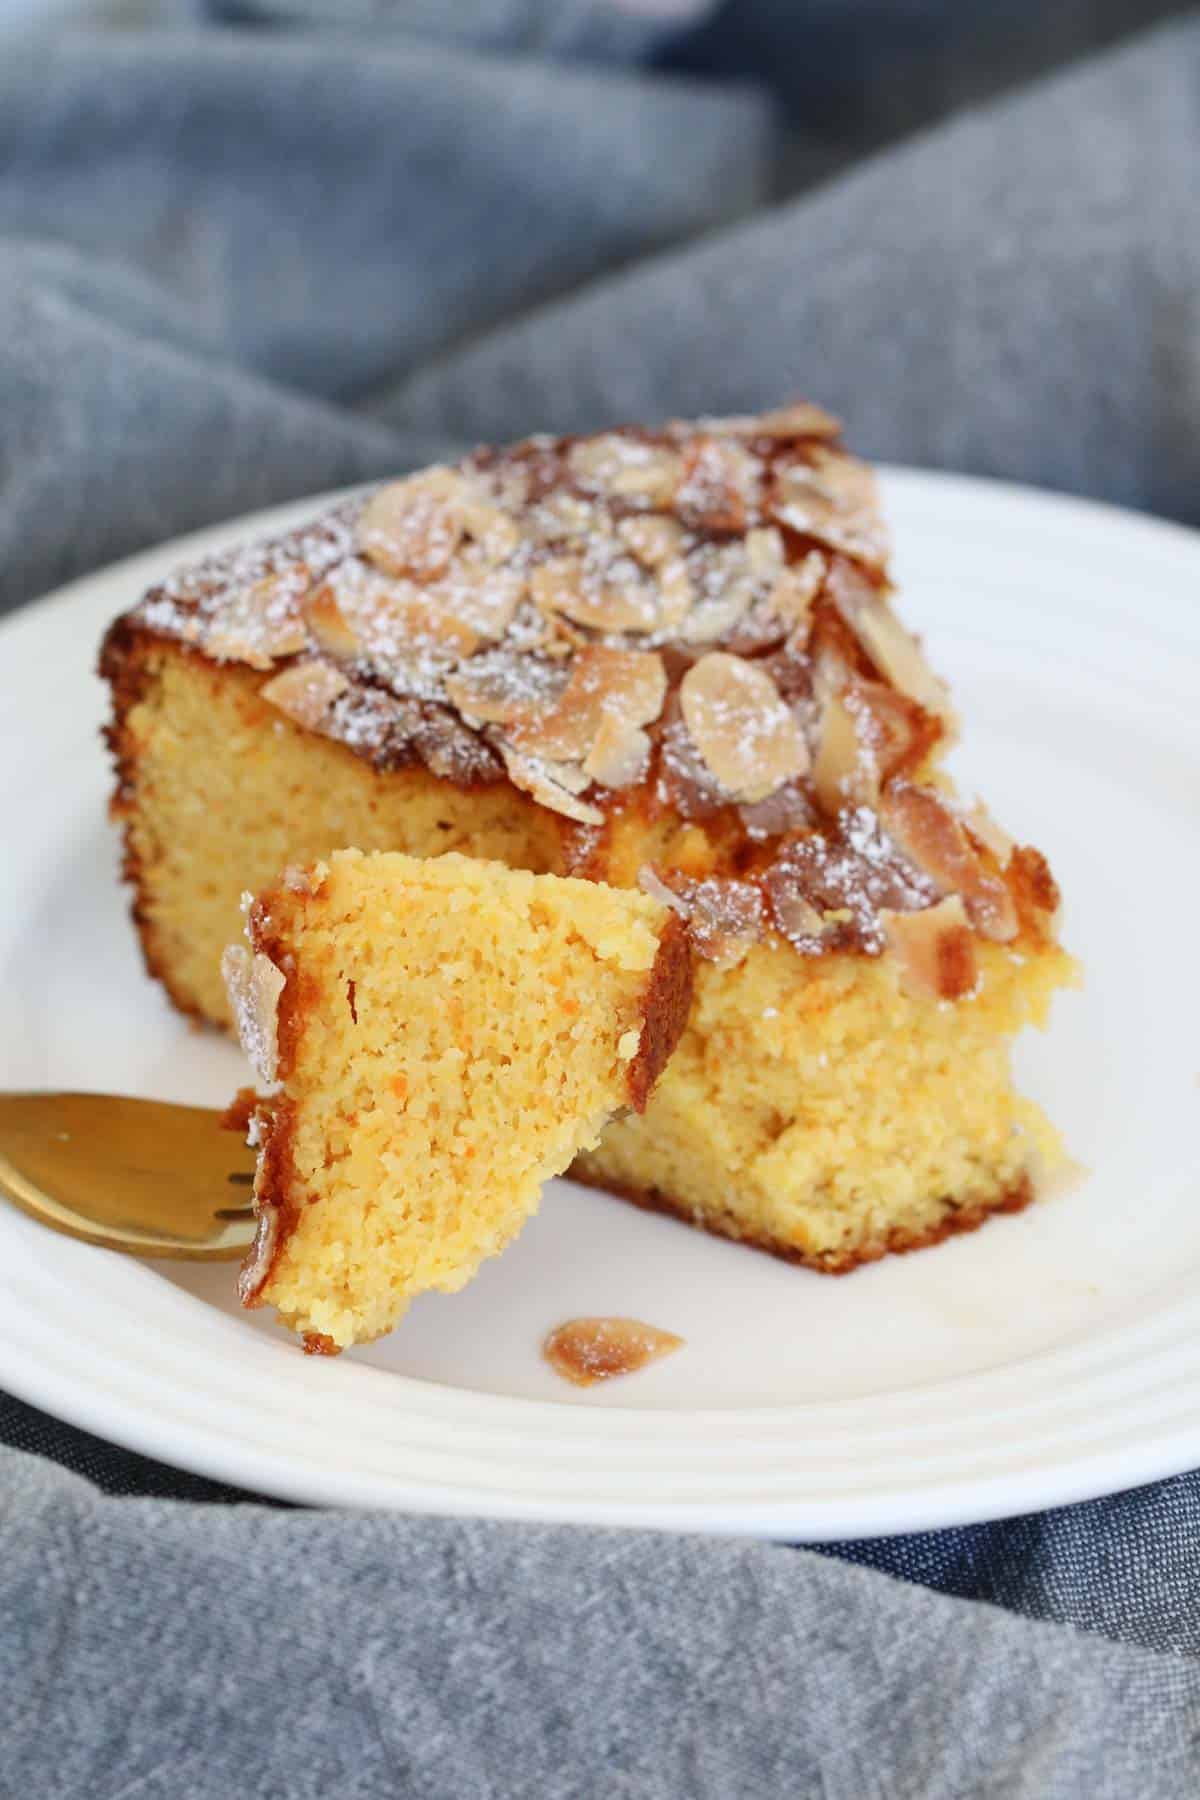 A forkful of almond and orange cake from a serve of cake on a plate.